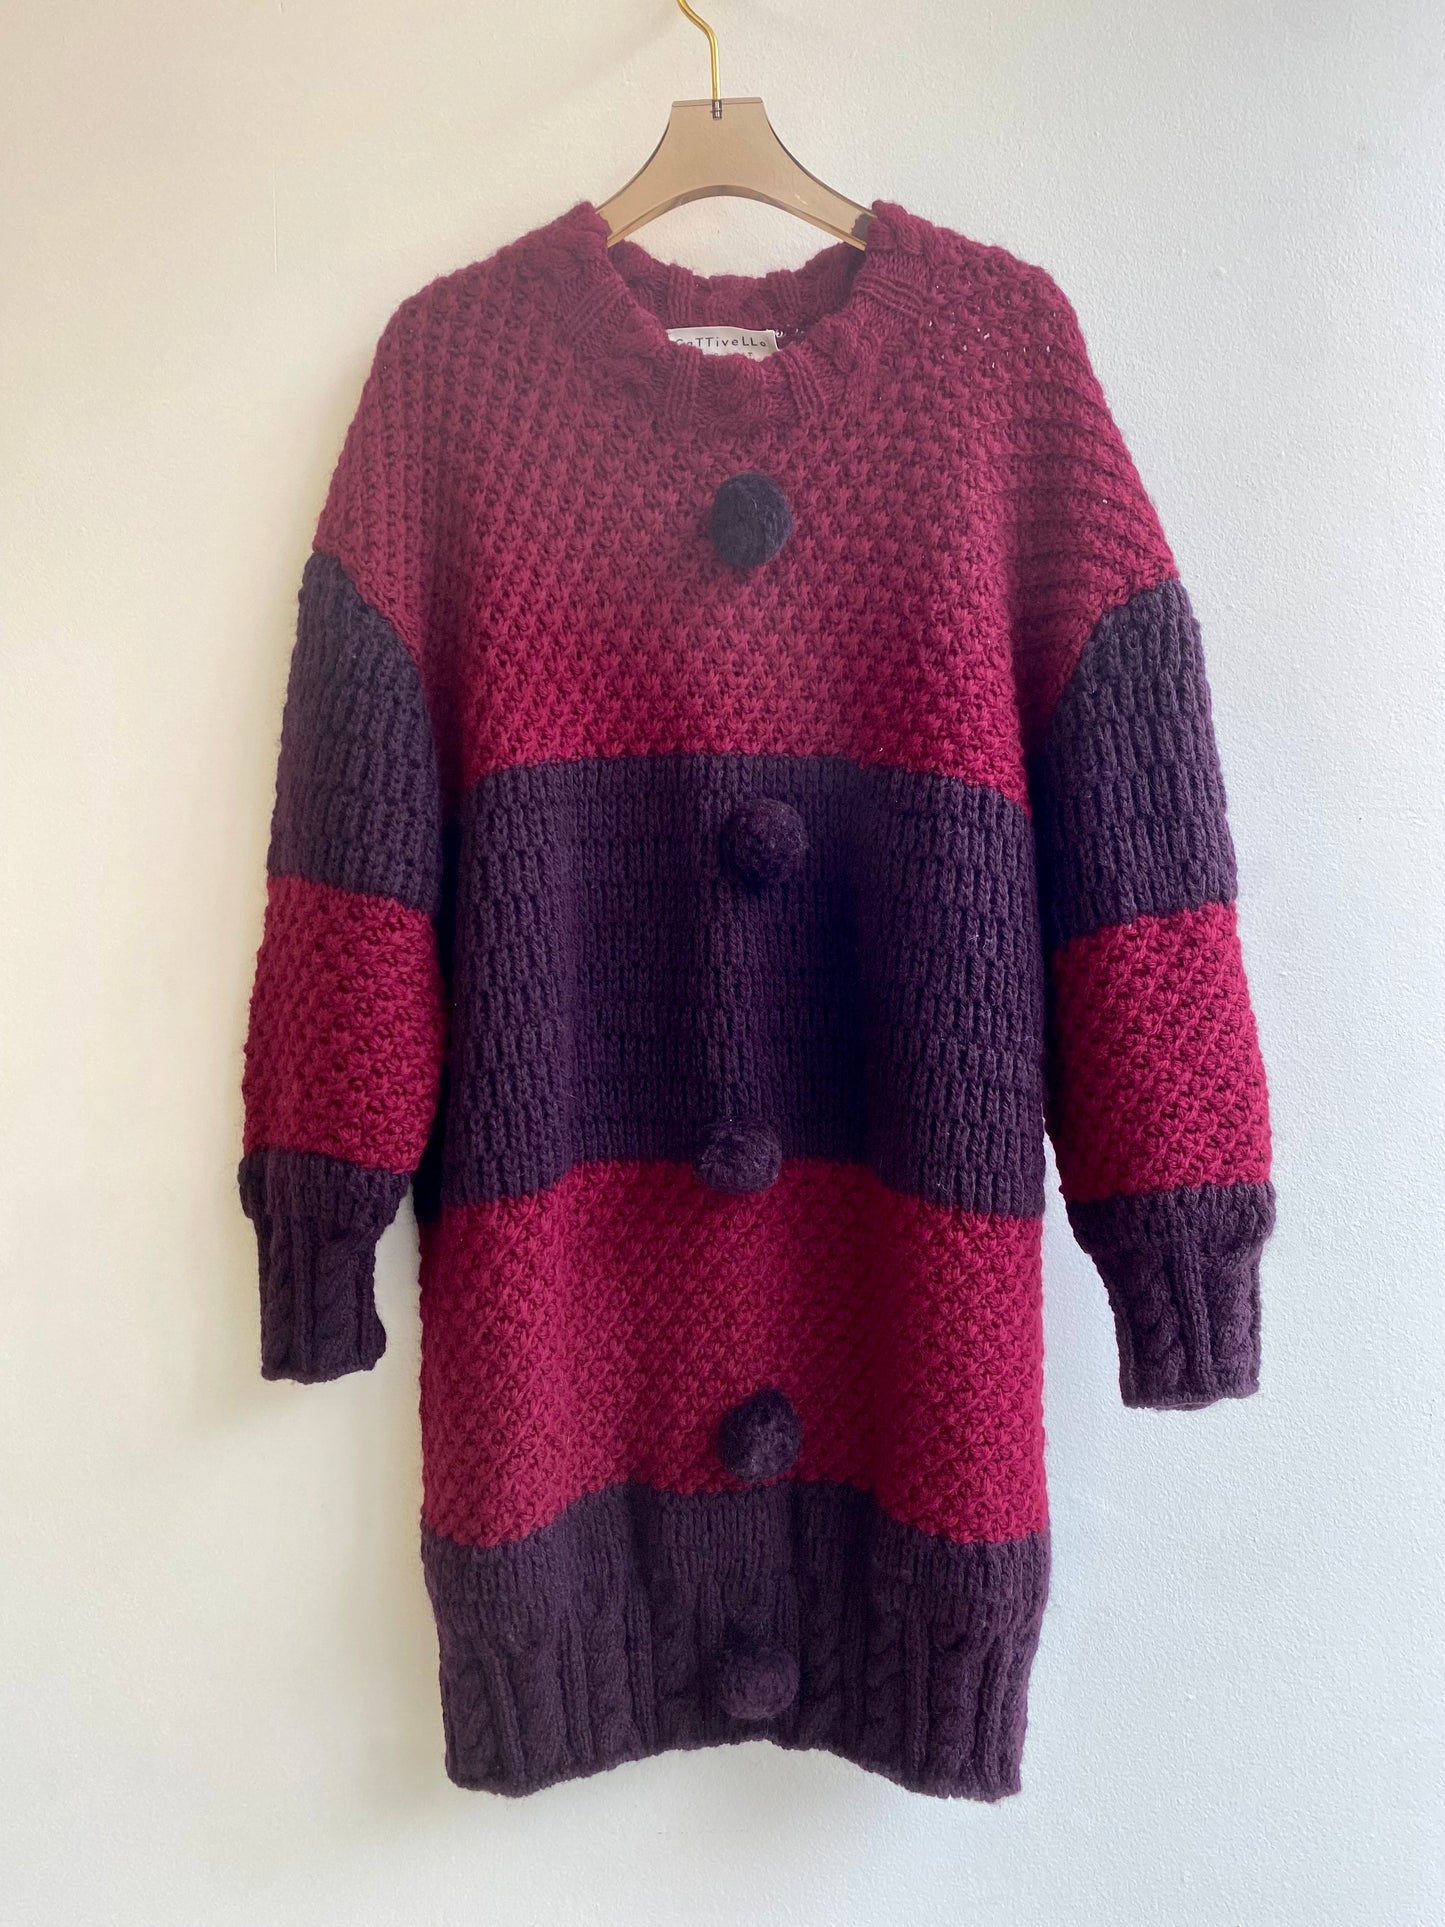 Hand-Knit Wool Sweater by Cattavelli